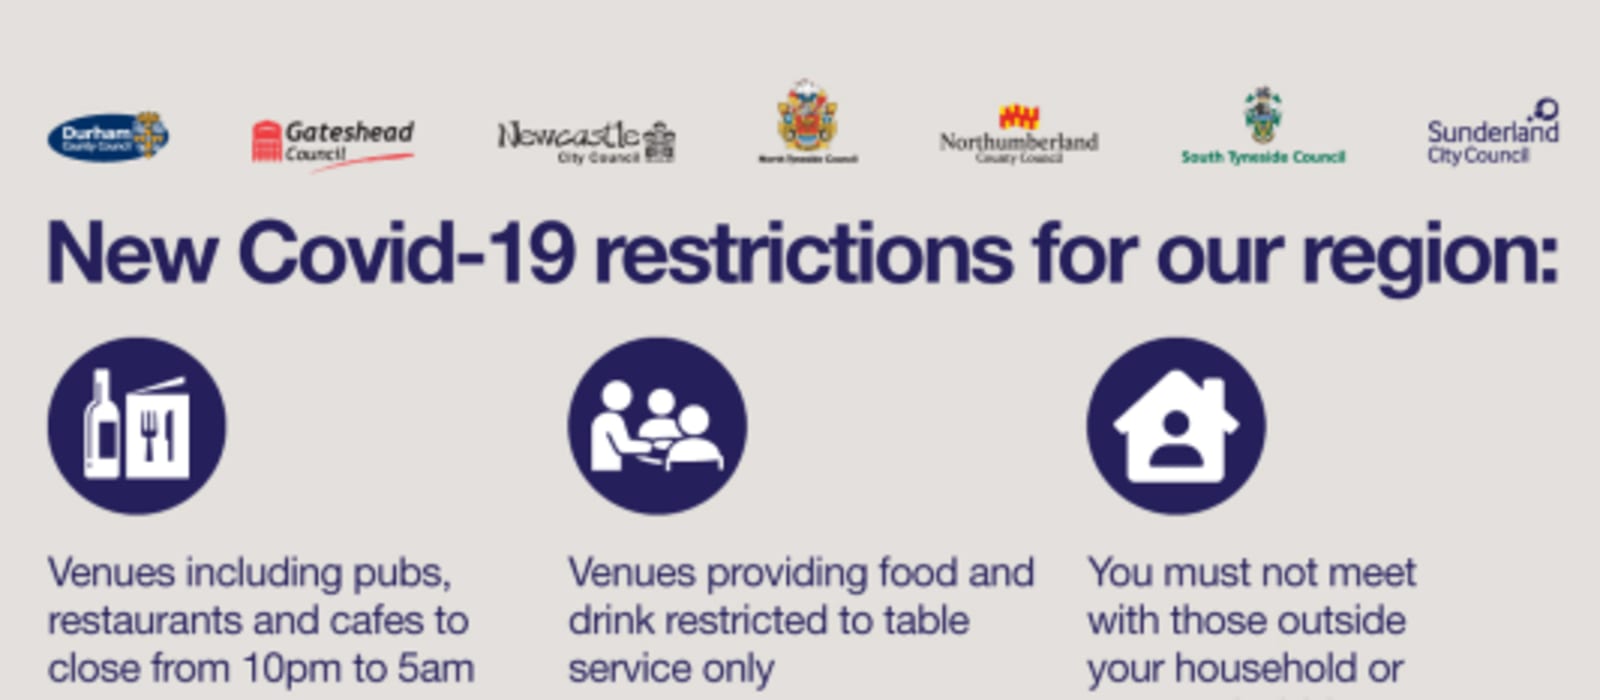 New Covid-19 restrictions in force for the North East